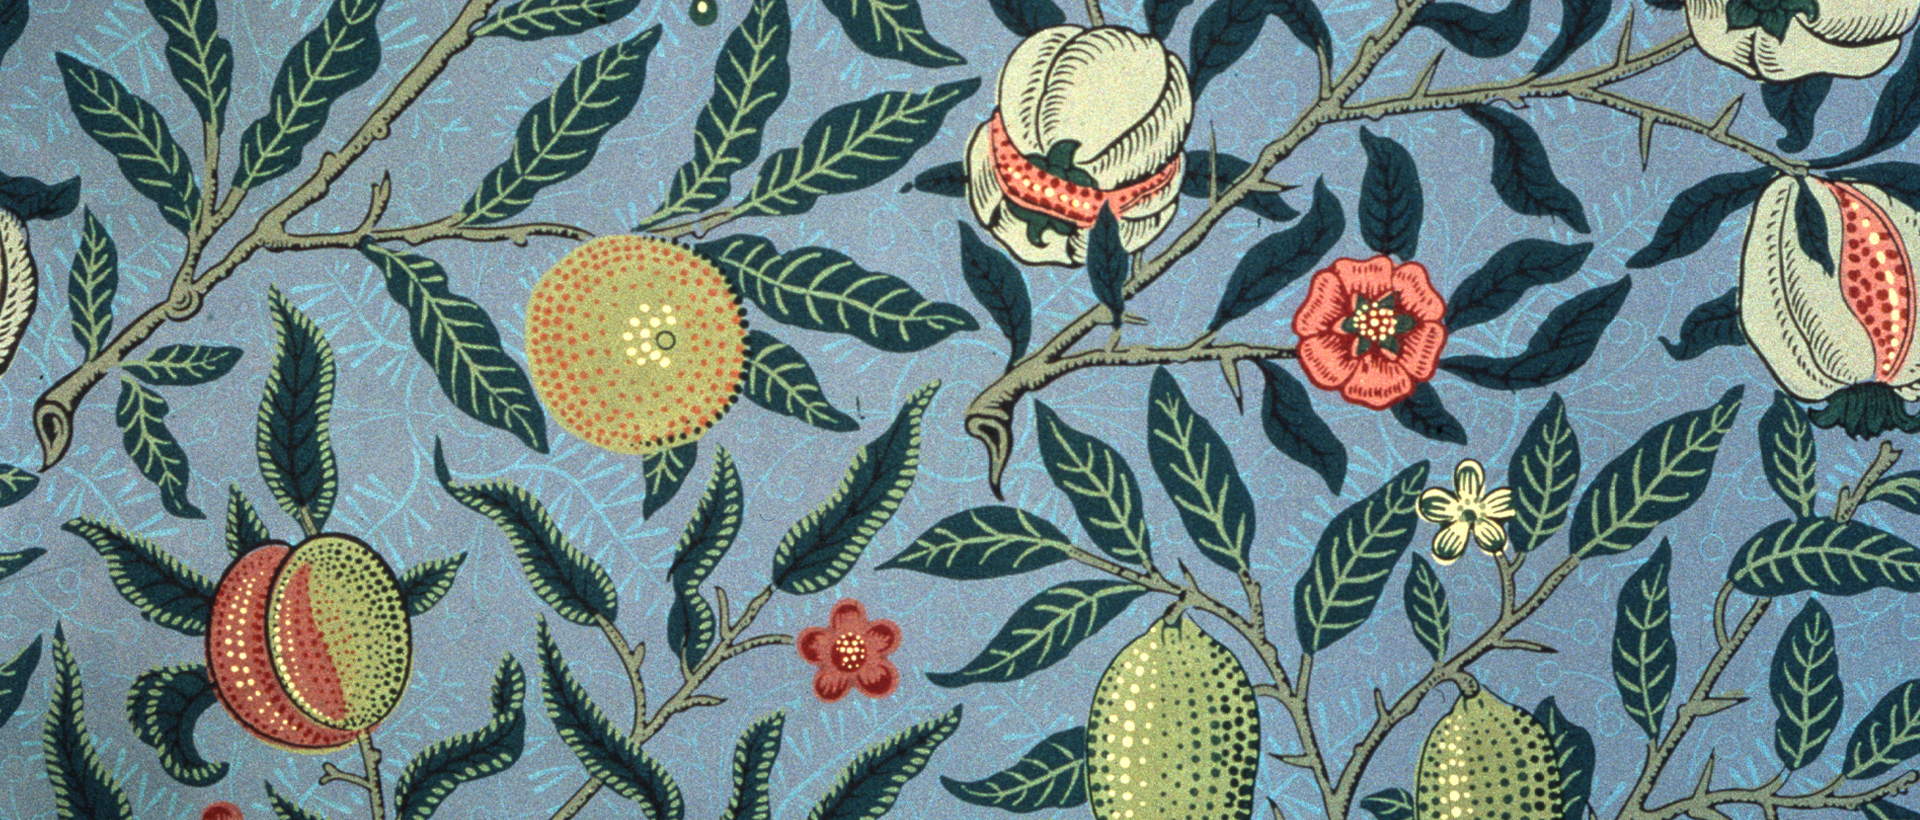 Wallpaper designed by William Morris in 1862. The pattern features pomegranates, oranges and lemons surrounded by leaves and flowers against a blue background.